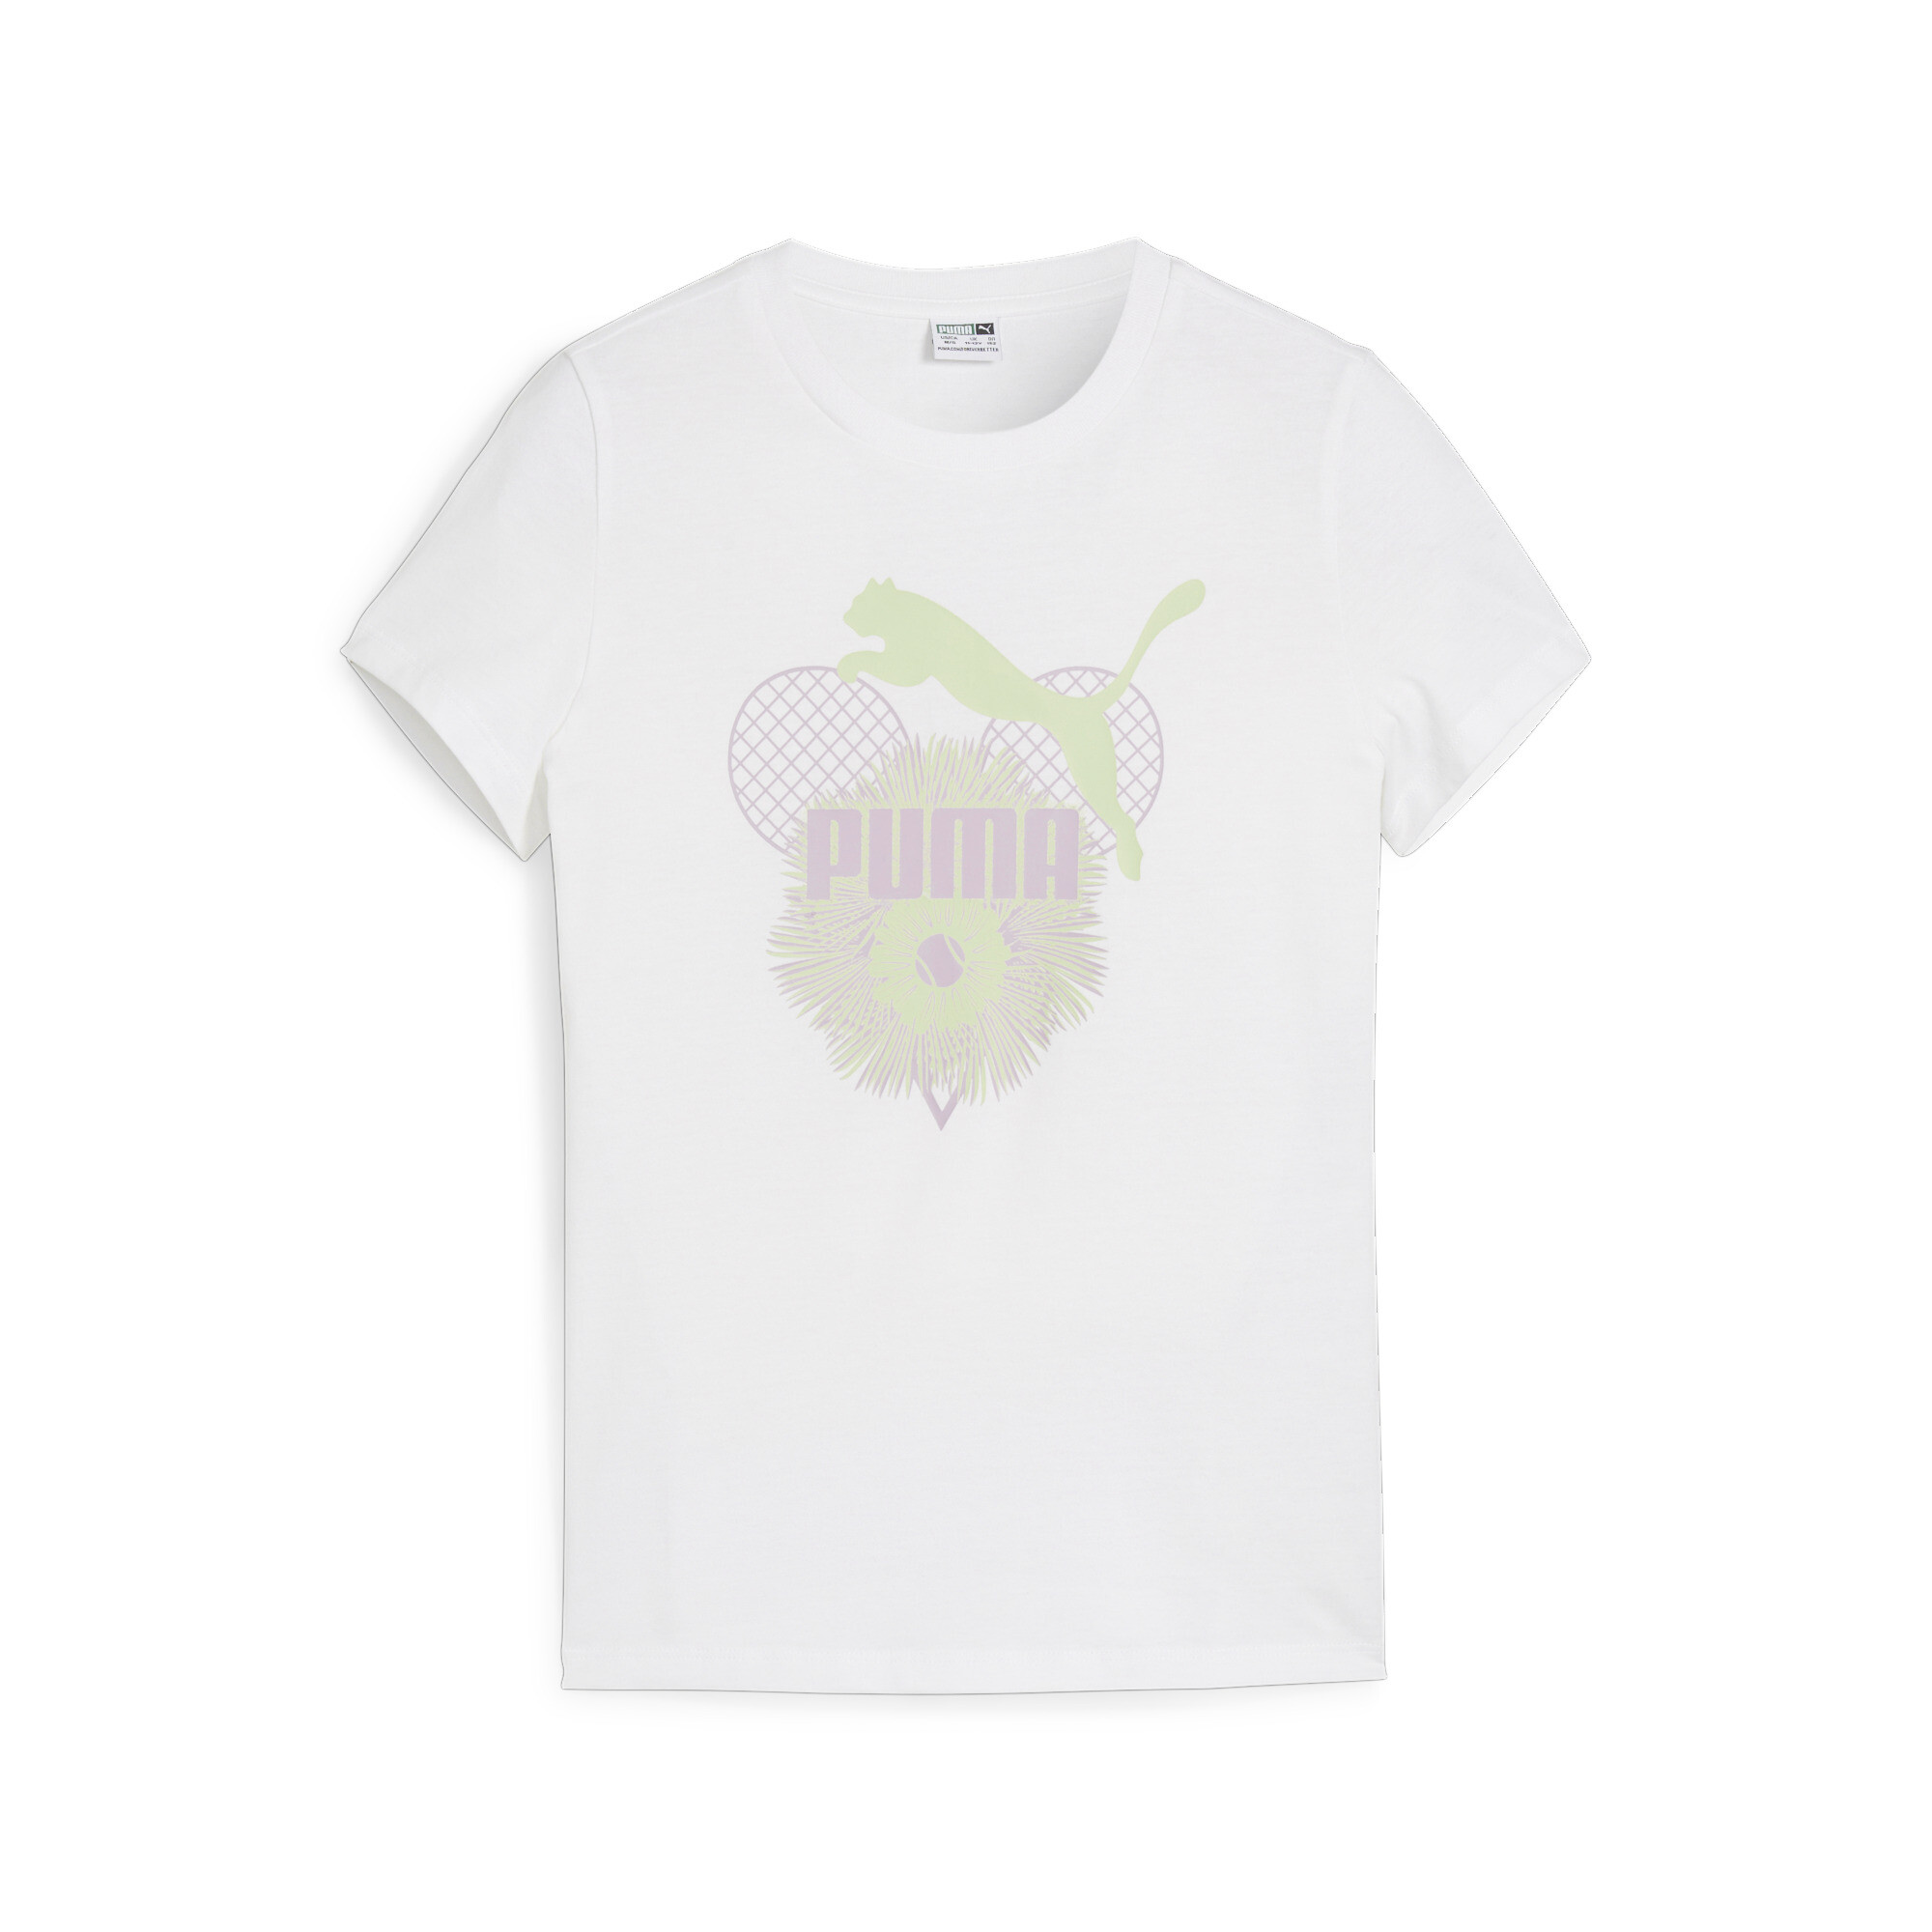 PUMA GRAPHICS MTCH PNT T-Shirt In White, Size 15-16 Youth